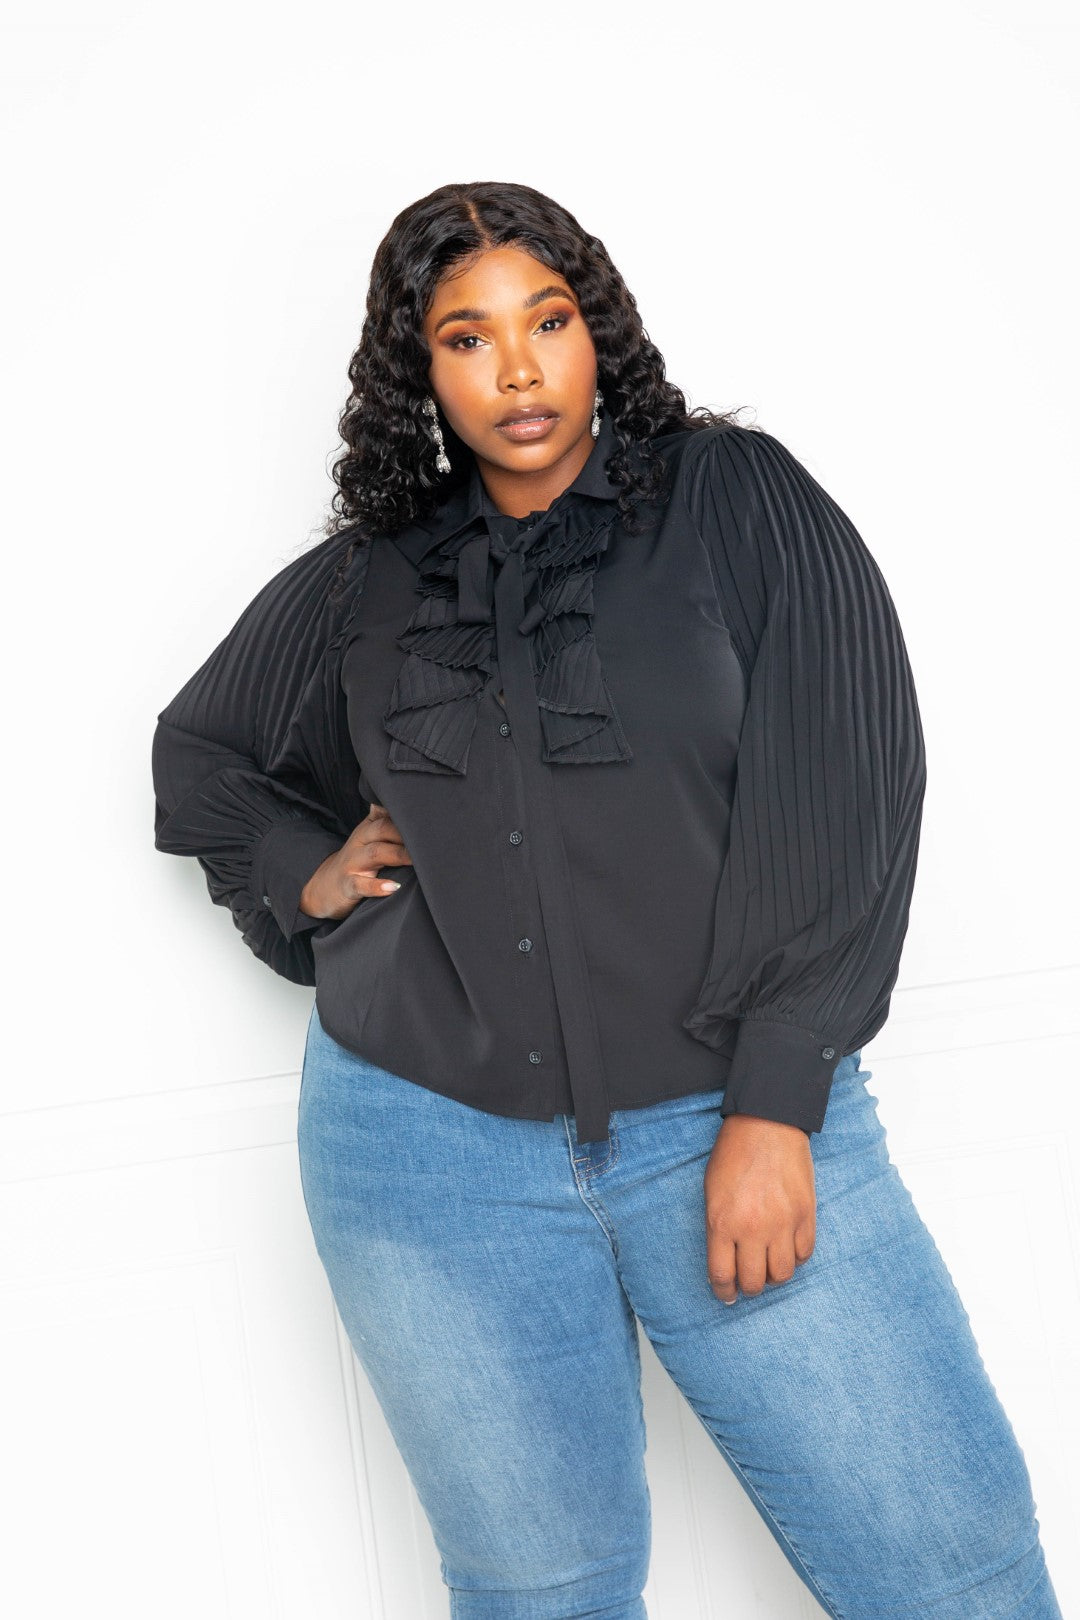 Pleated Sleeve Blouse With Waterfall Frill And Bow | Black, Forrest Green, PLUS SIZE, PLUS SIZE TOPS, SALE, SALE PLUS SIZE | Style Your Curves